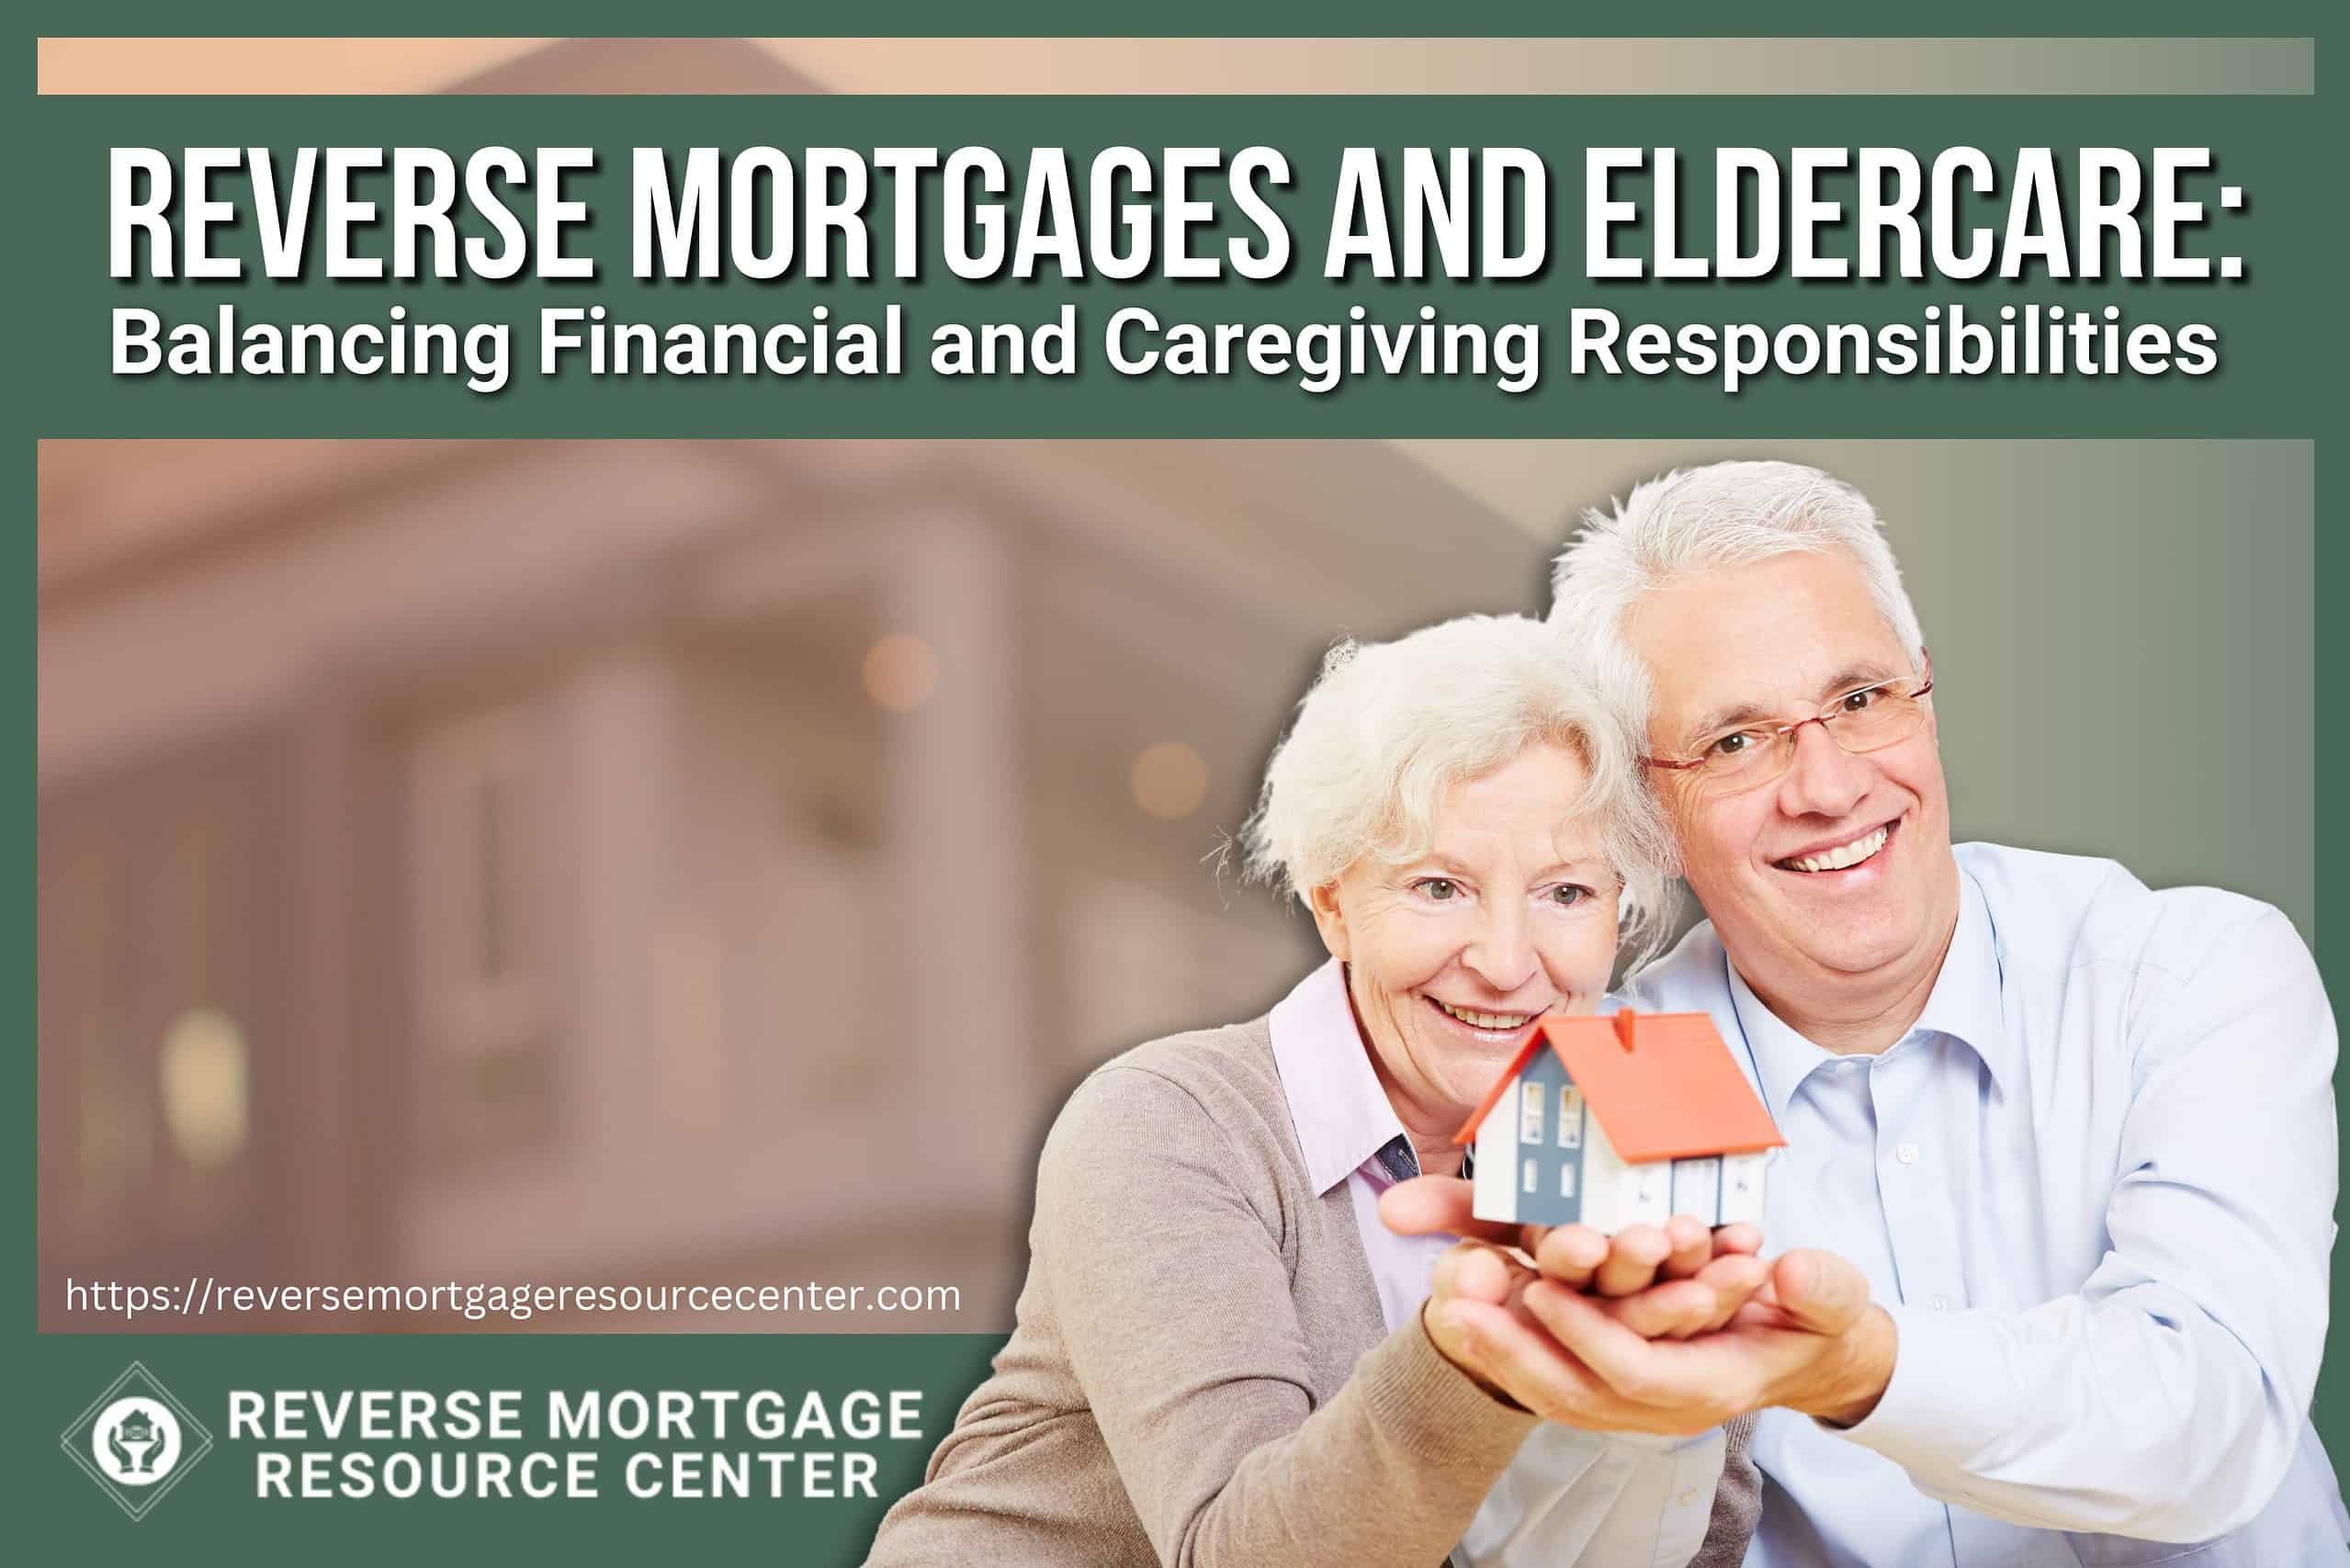 Reverse Mortgages and Eldercare Balancing Financial and Caregiving Responsibilities